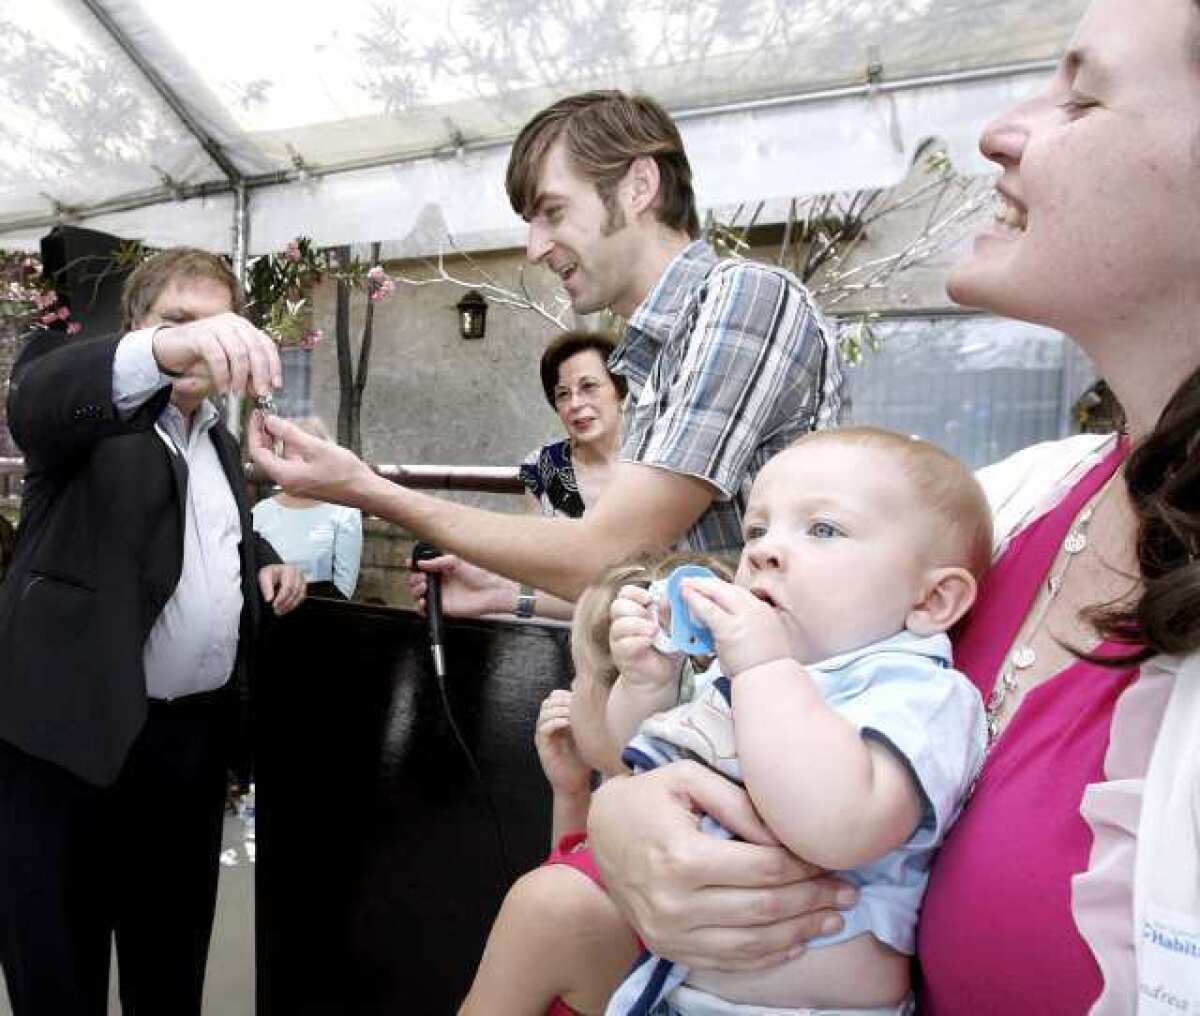 San Gabriel Valley Habitat for Humanity board member Thomas Bunn III, left, hands the keys to their new home to Shane Mulholland as his wife Andrea and baby Luke look on during ceremony for the Geneva Street homes in Glendale.